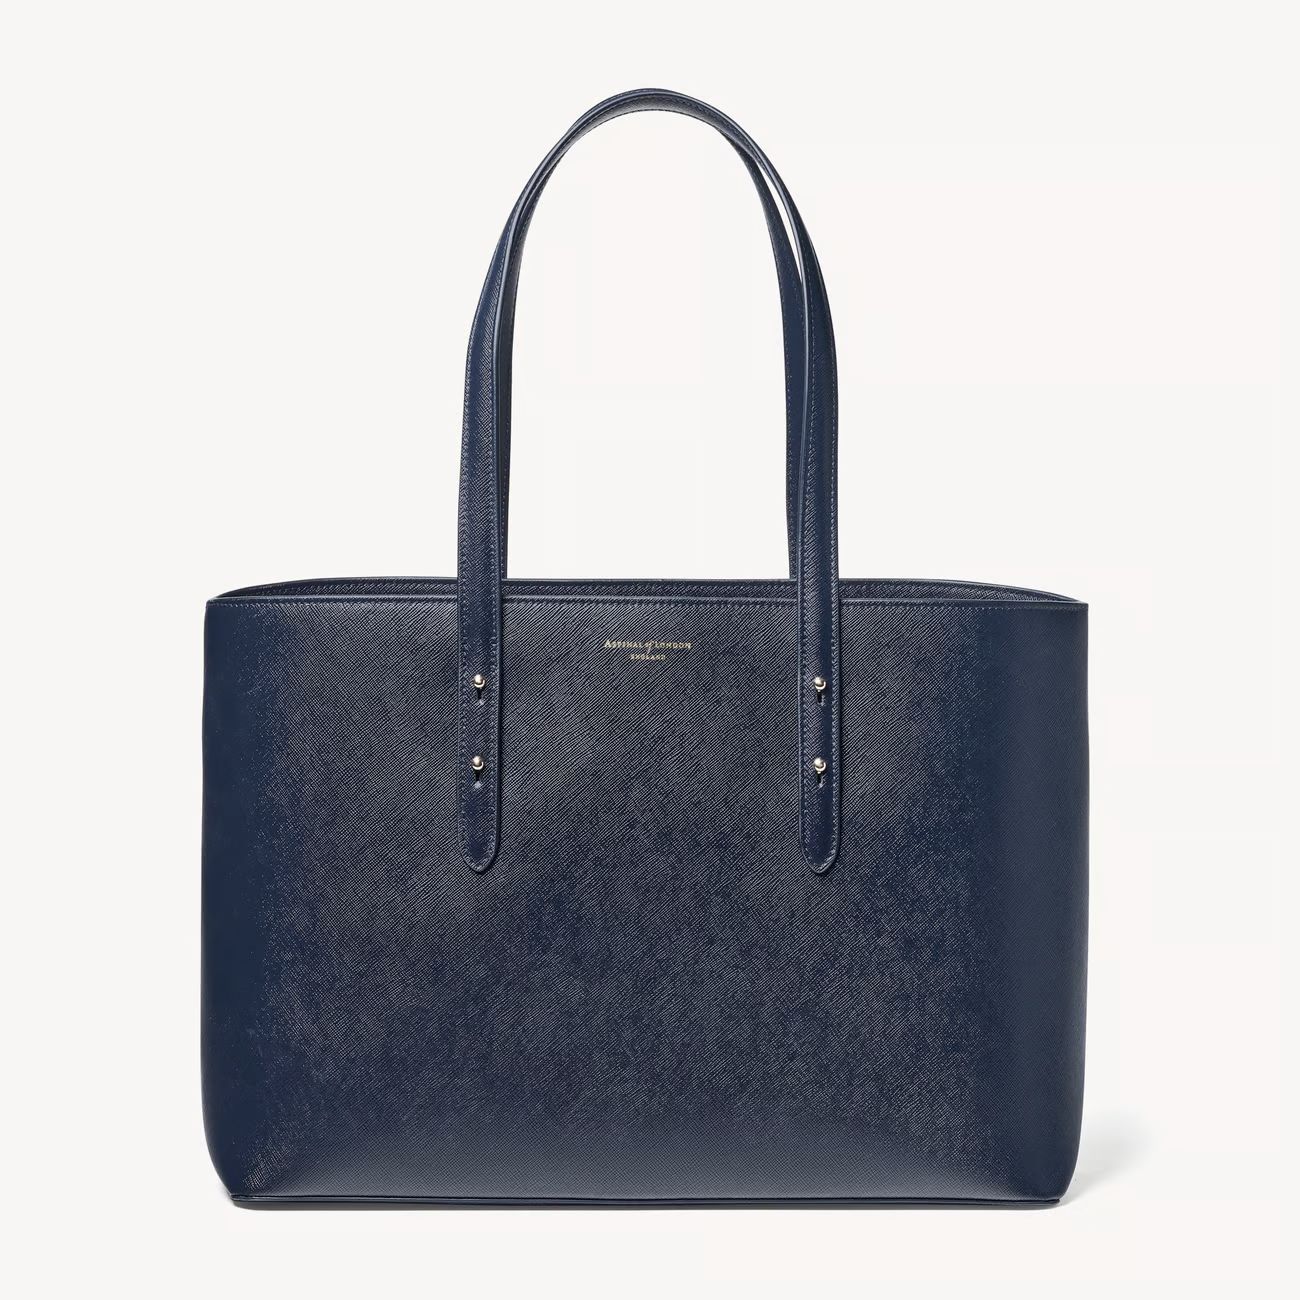 Regent Tote
        Navy Saffiano | Aspinal of London